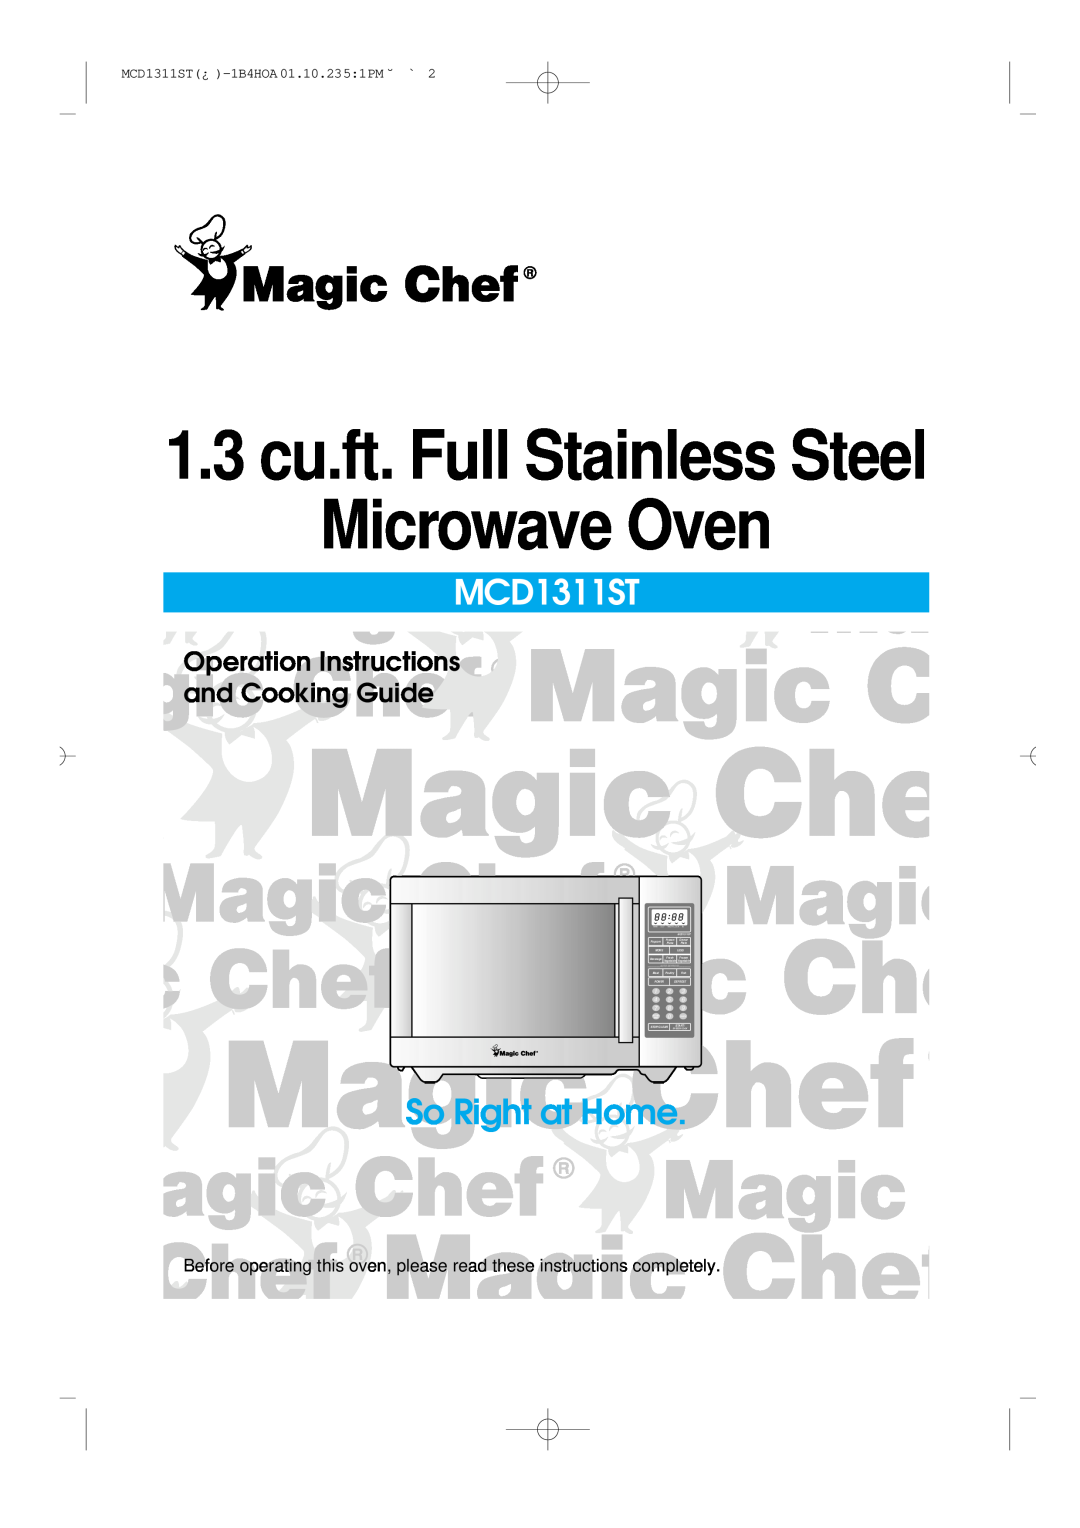 Magic Chef MCD1311ST manual Microwave Oven, 1.3 cu.ft. Full Stainless Steel, So Right at Home, Auto Defrost 